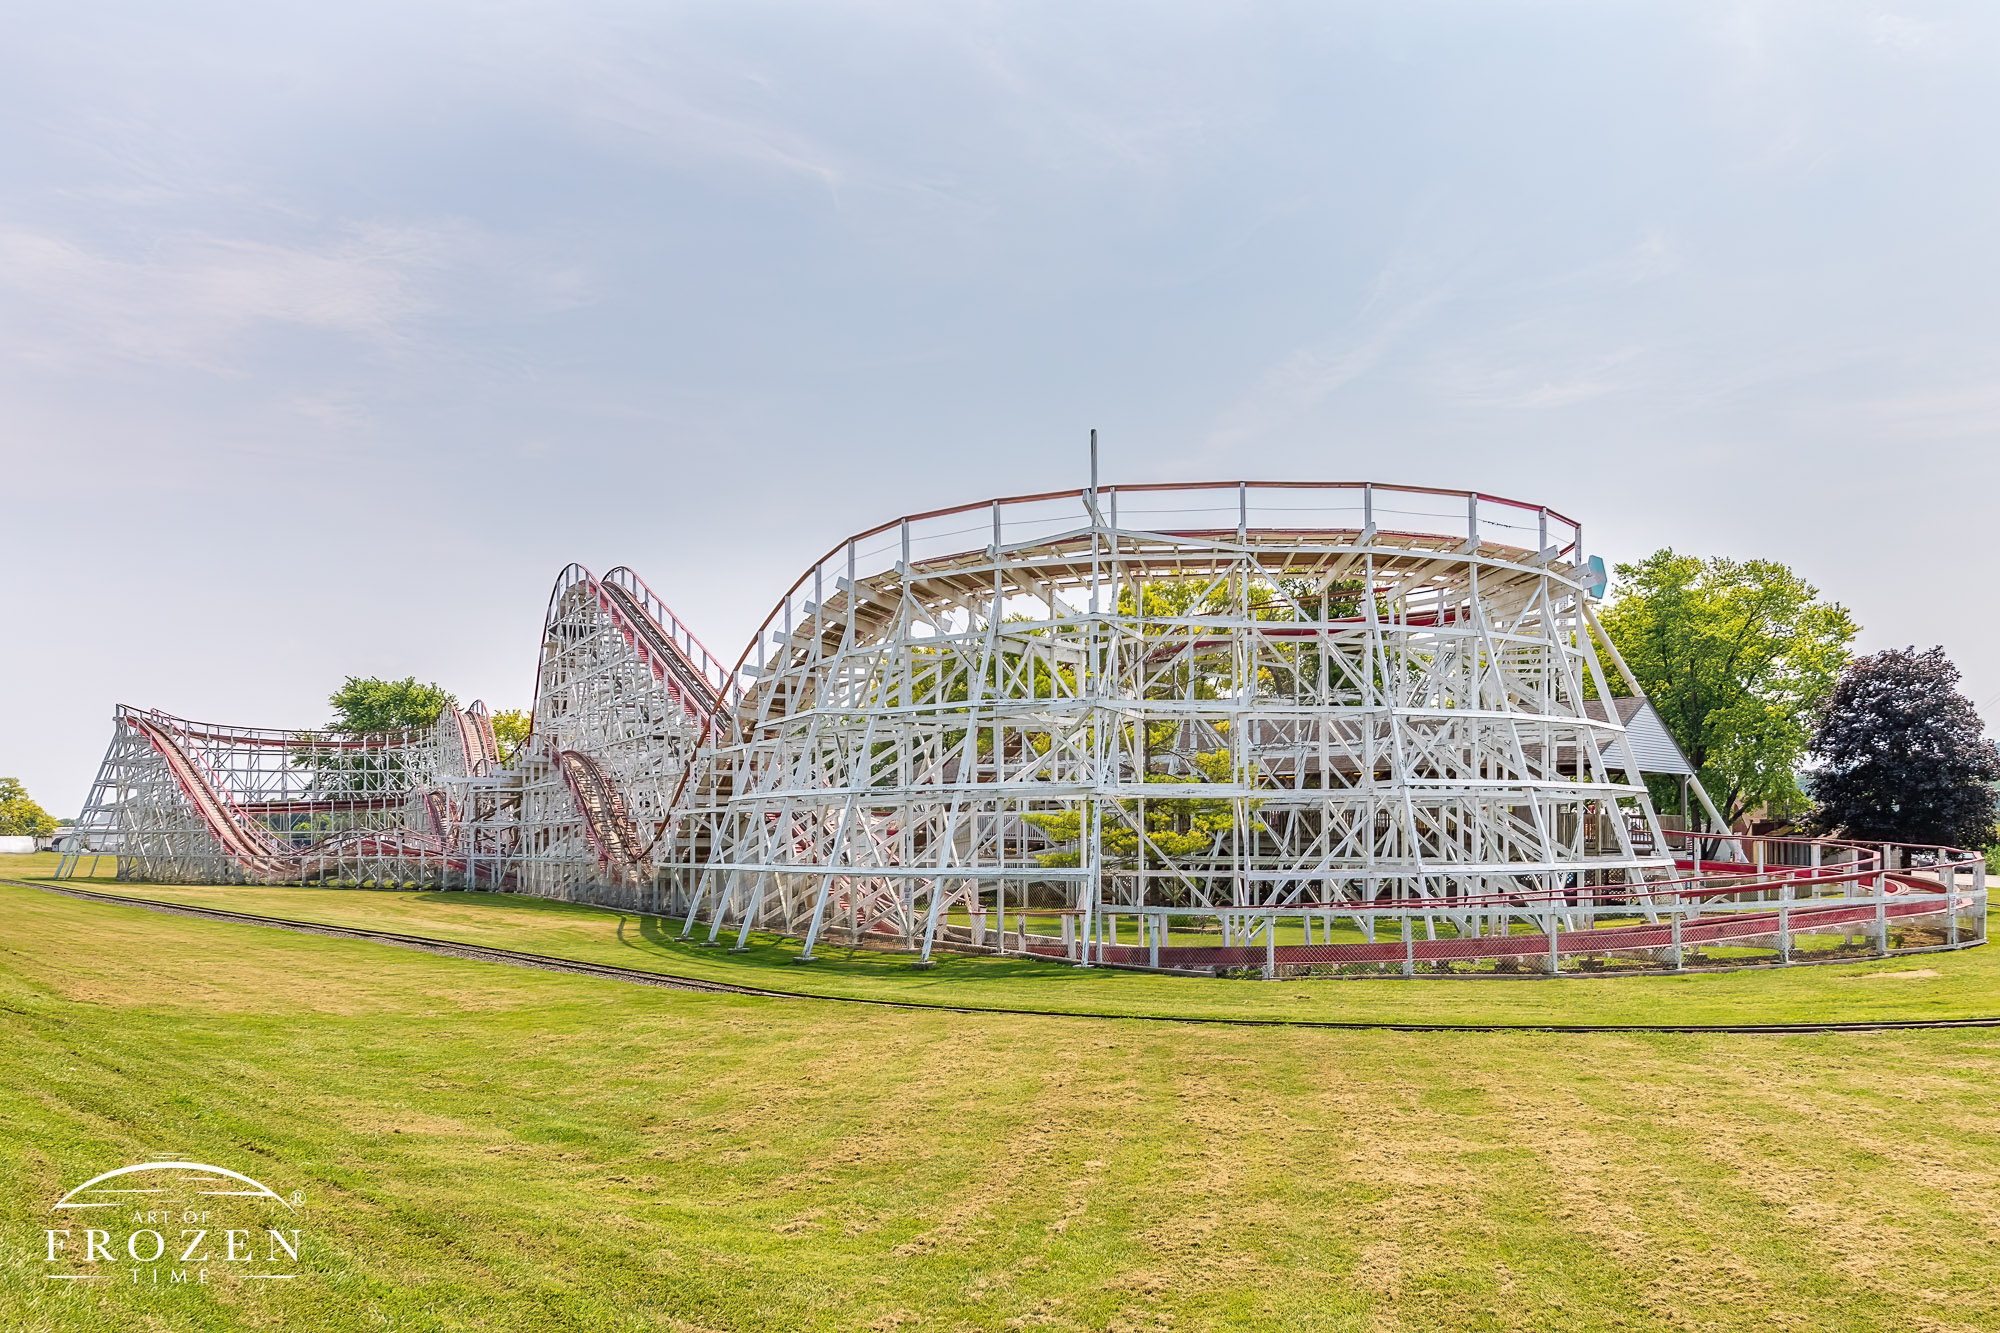 A classic wood rollercoaster entertains riders on a hot summer day during the Butler County Ohio Fair